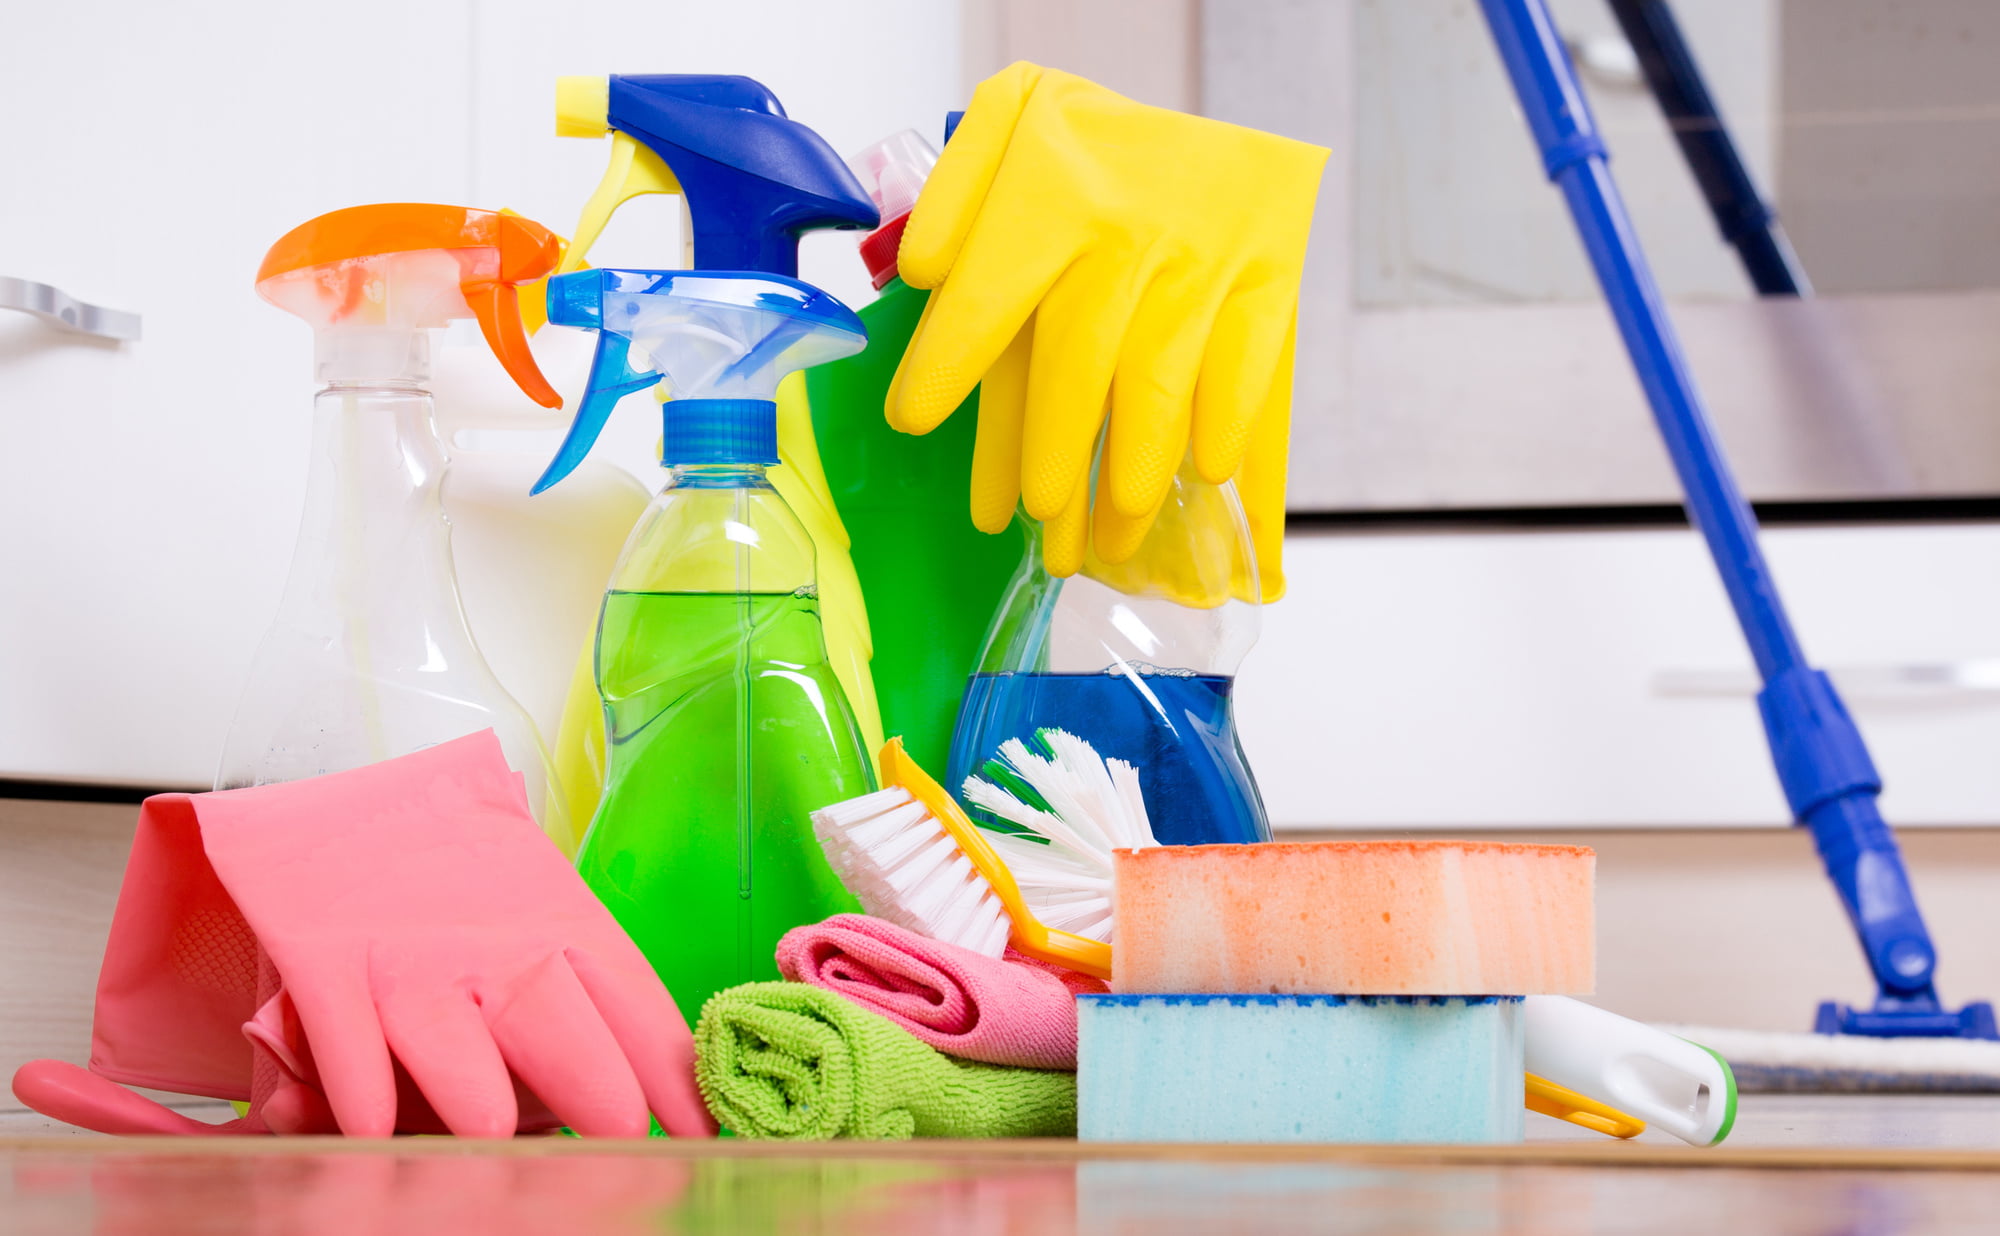 Does your home desperately need a deep clean? Discover what’s included in a deluxe cleaning service, how to find a service provider, and why your home needs it.